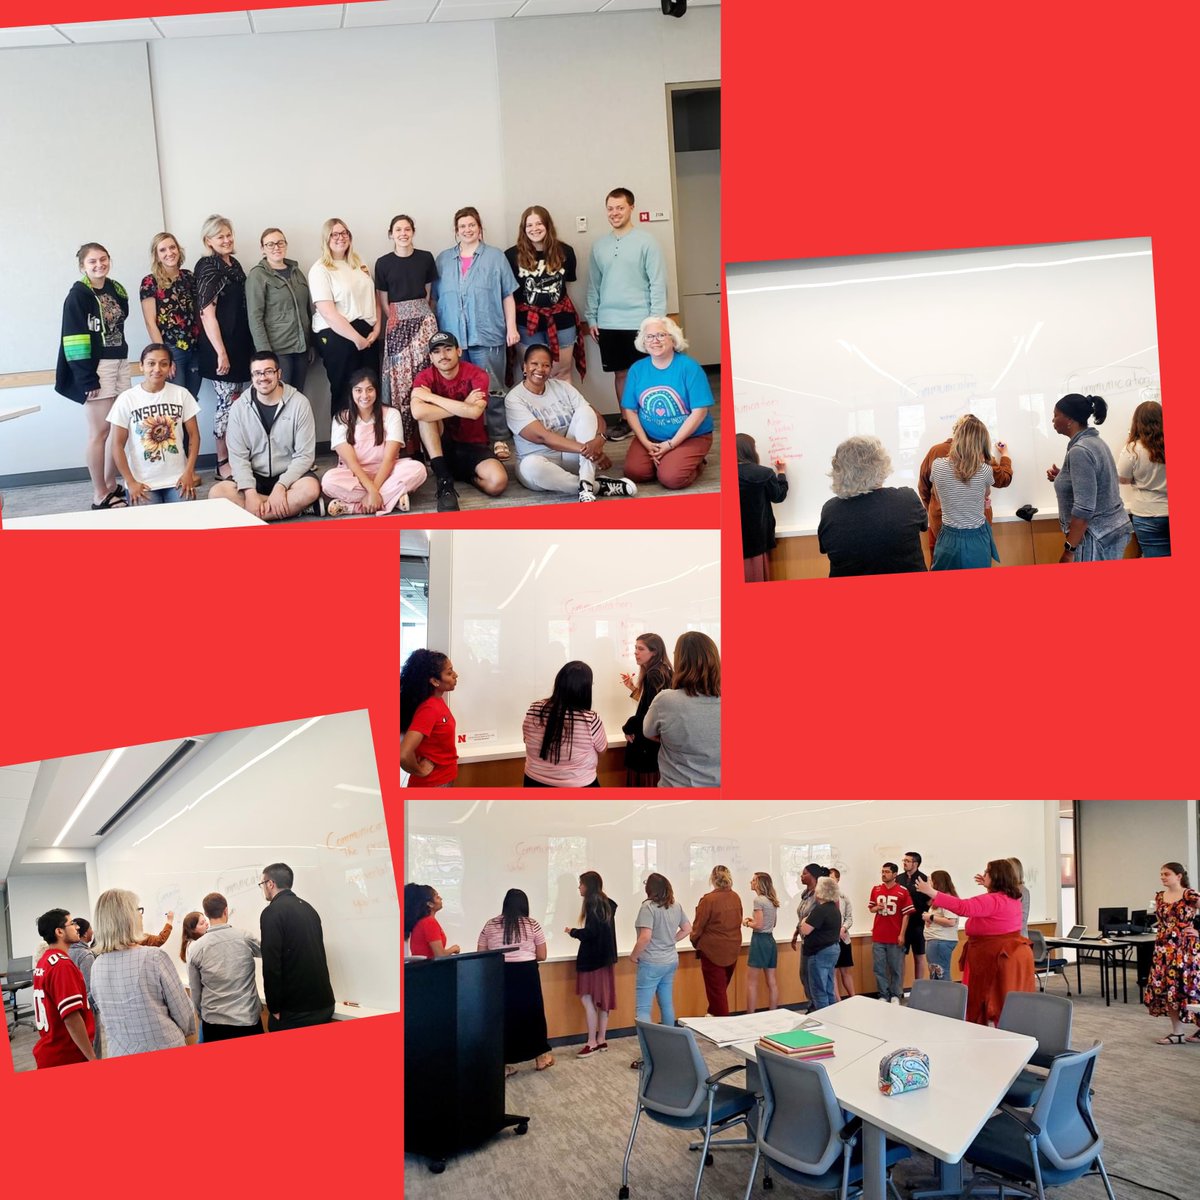 #TLTE is excited to support @OmahaPubSchool #Paraprofessional Cohorts 4  and 5 on their journey to becoming #ElementaryEducation #teachers  @UNLincoln! It's great to be in Carolyn Pope Edwards Hall this summer. @UNL_CEHS  #teachereducation #schools #partnership